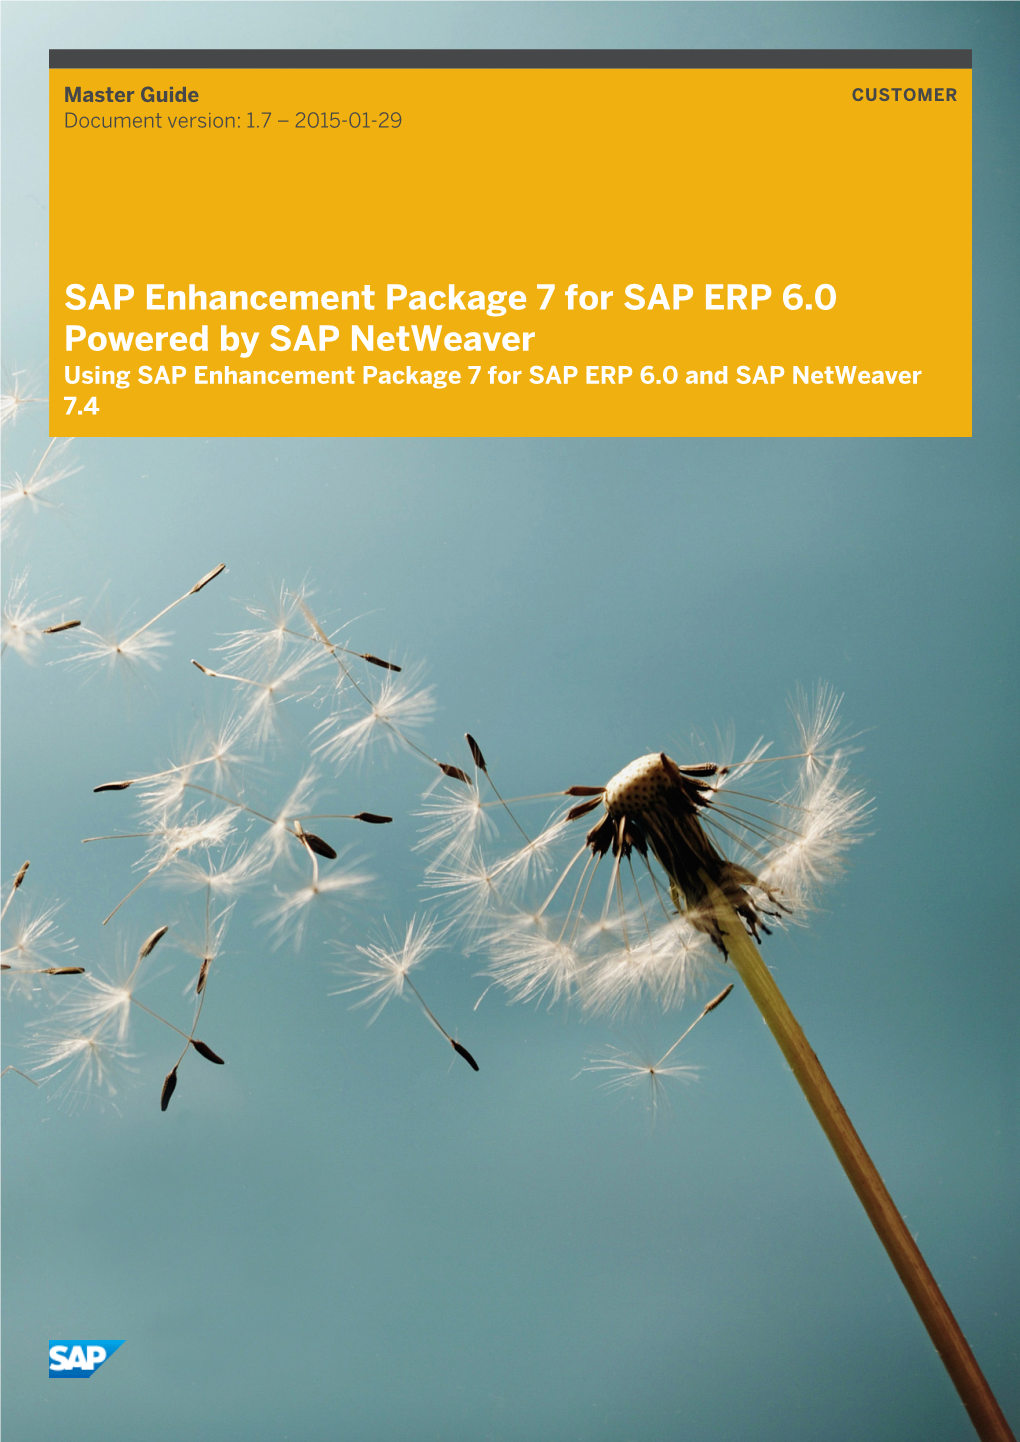 SAP Enhancement Package 7 for SAP ERP 6.0 Powered by SAP Netweaver Using SAP Enhancement Package 7 for SAP ERP 6.0 and SAP Netweaver 7.4 Document History